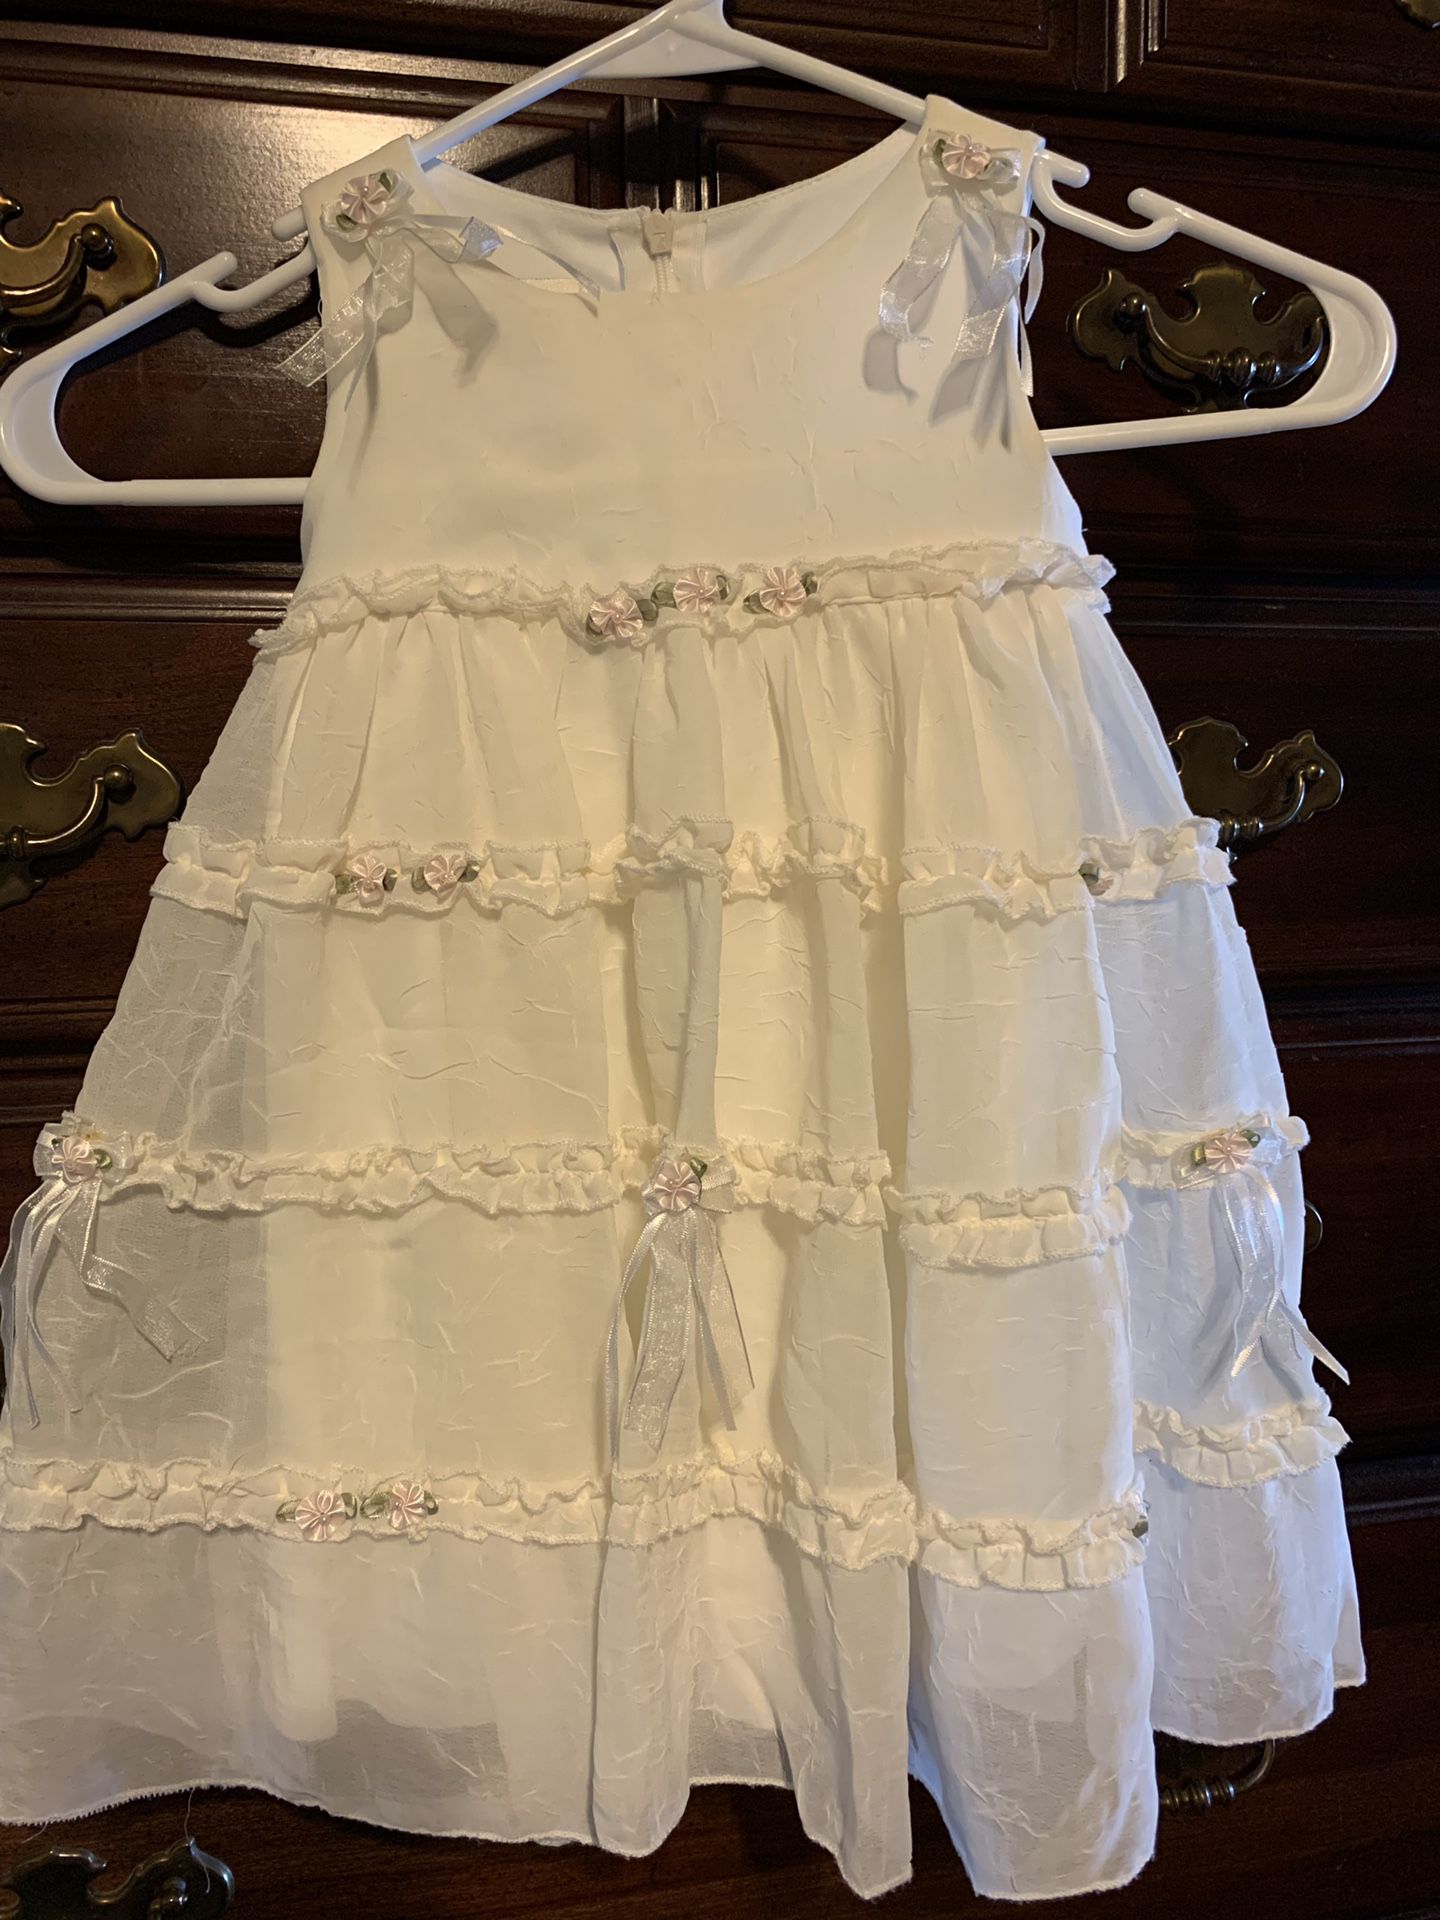 Girls size 2T sheer cream dress with pink flowers